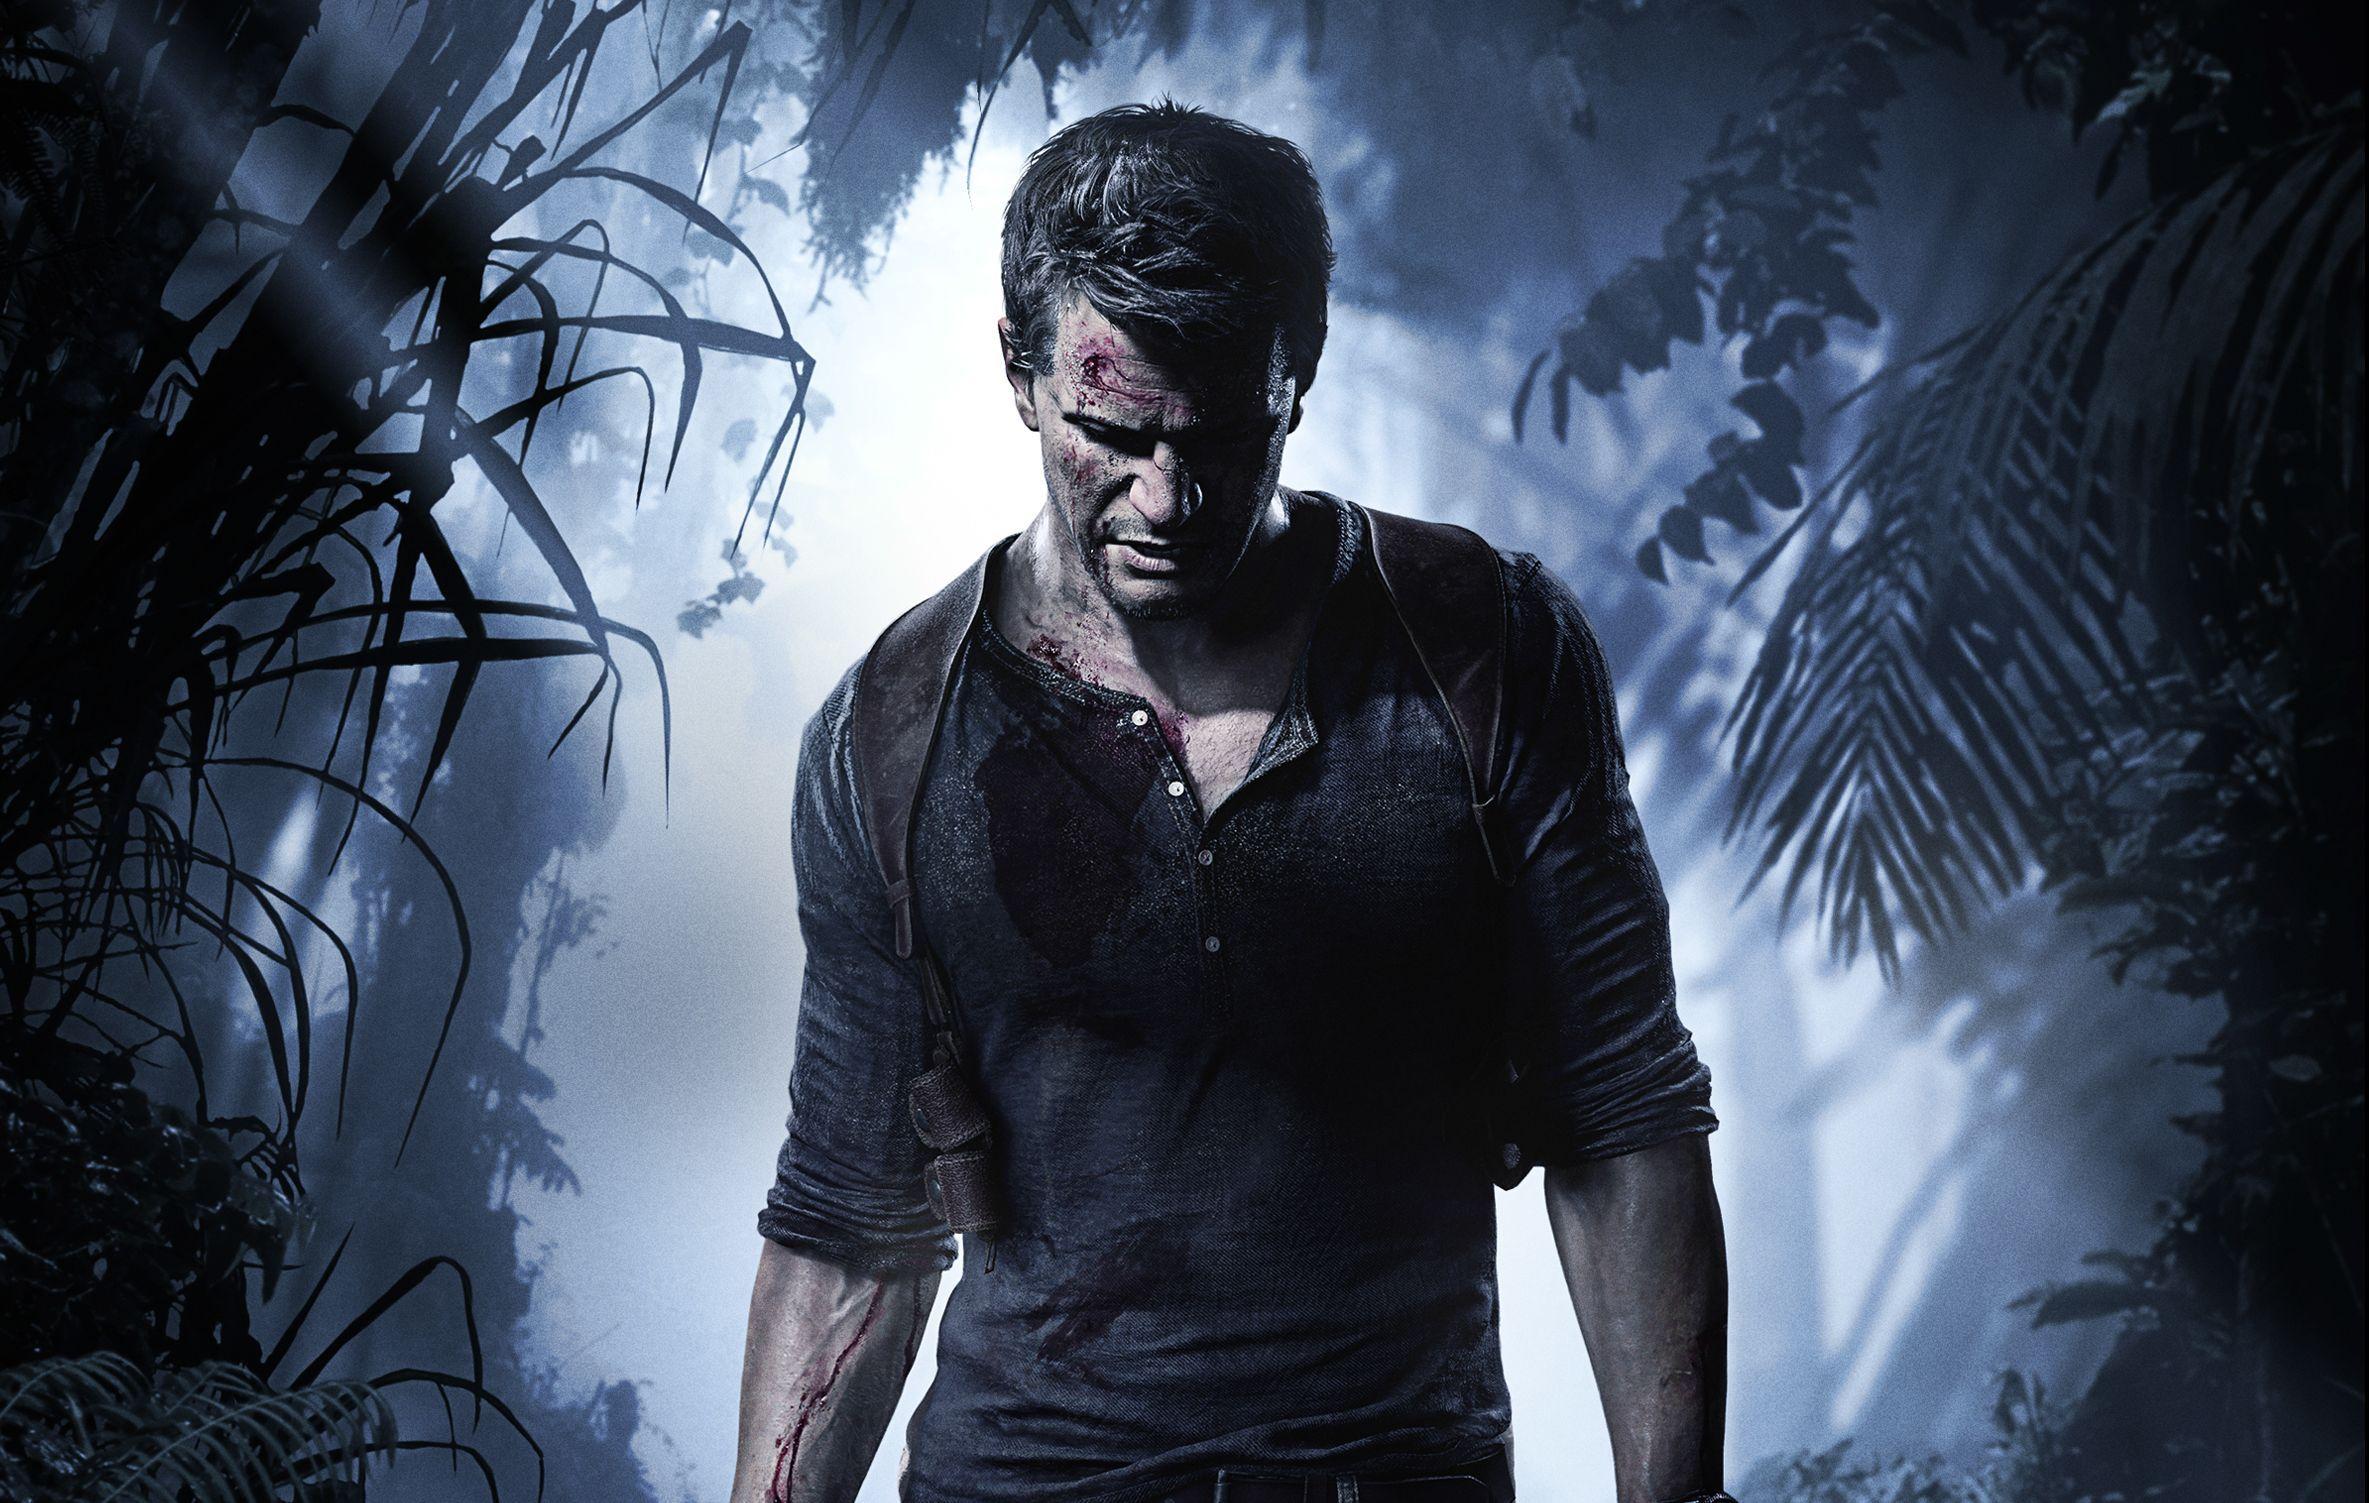 PS4 Exclusive Uncharted 4: A Thief's End Gets a New Gameplay Demo